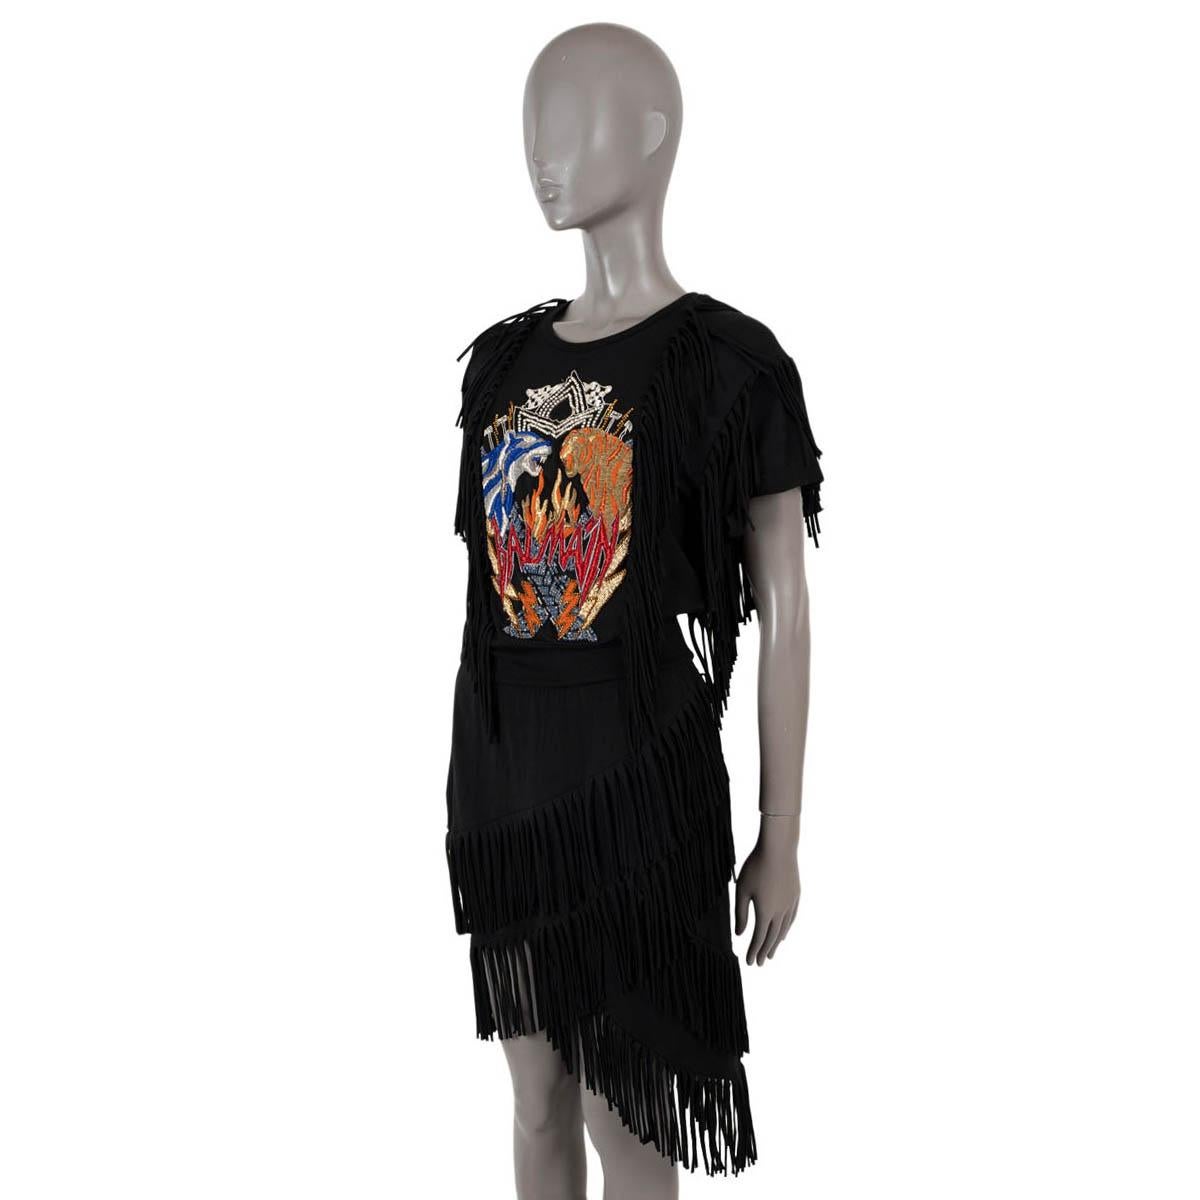 100% authentic Balmain asymmetric dress in black jersey cotton (46%), modal (46%) and elastane (8%). Features with rock'n'roll like multicolor embroidery and rhinestone embellishments, asymmetric fringe trims, a crewneck and short sleeve. Unlined.